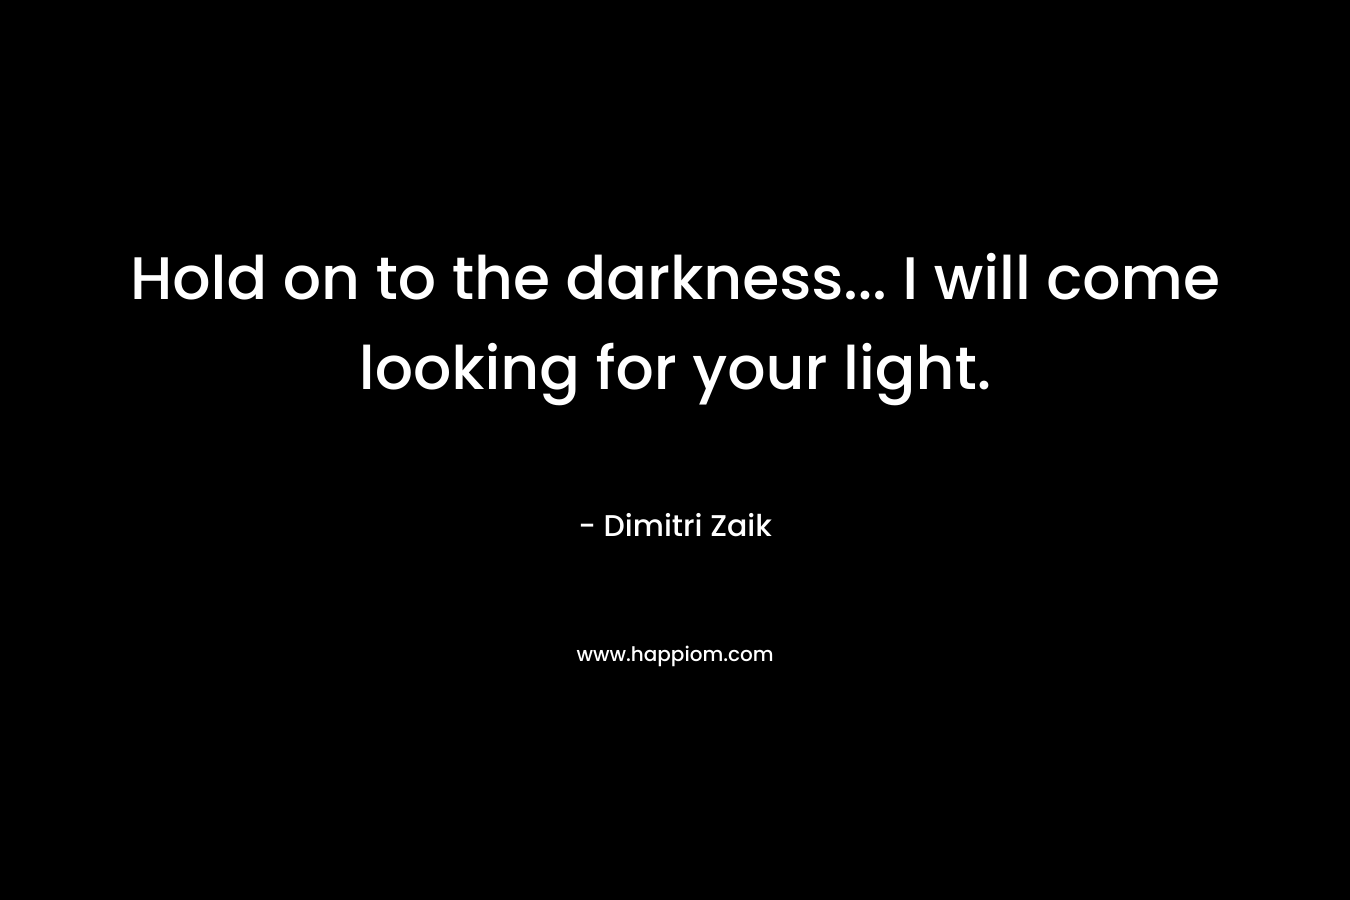 Hold on to the darkness... I will come looking for your light.